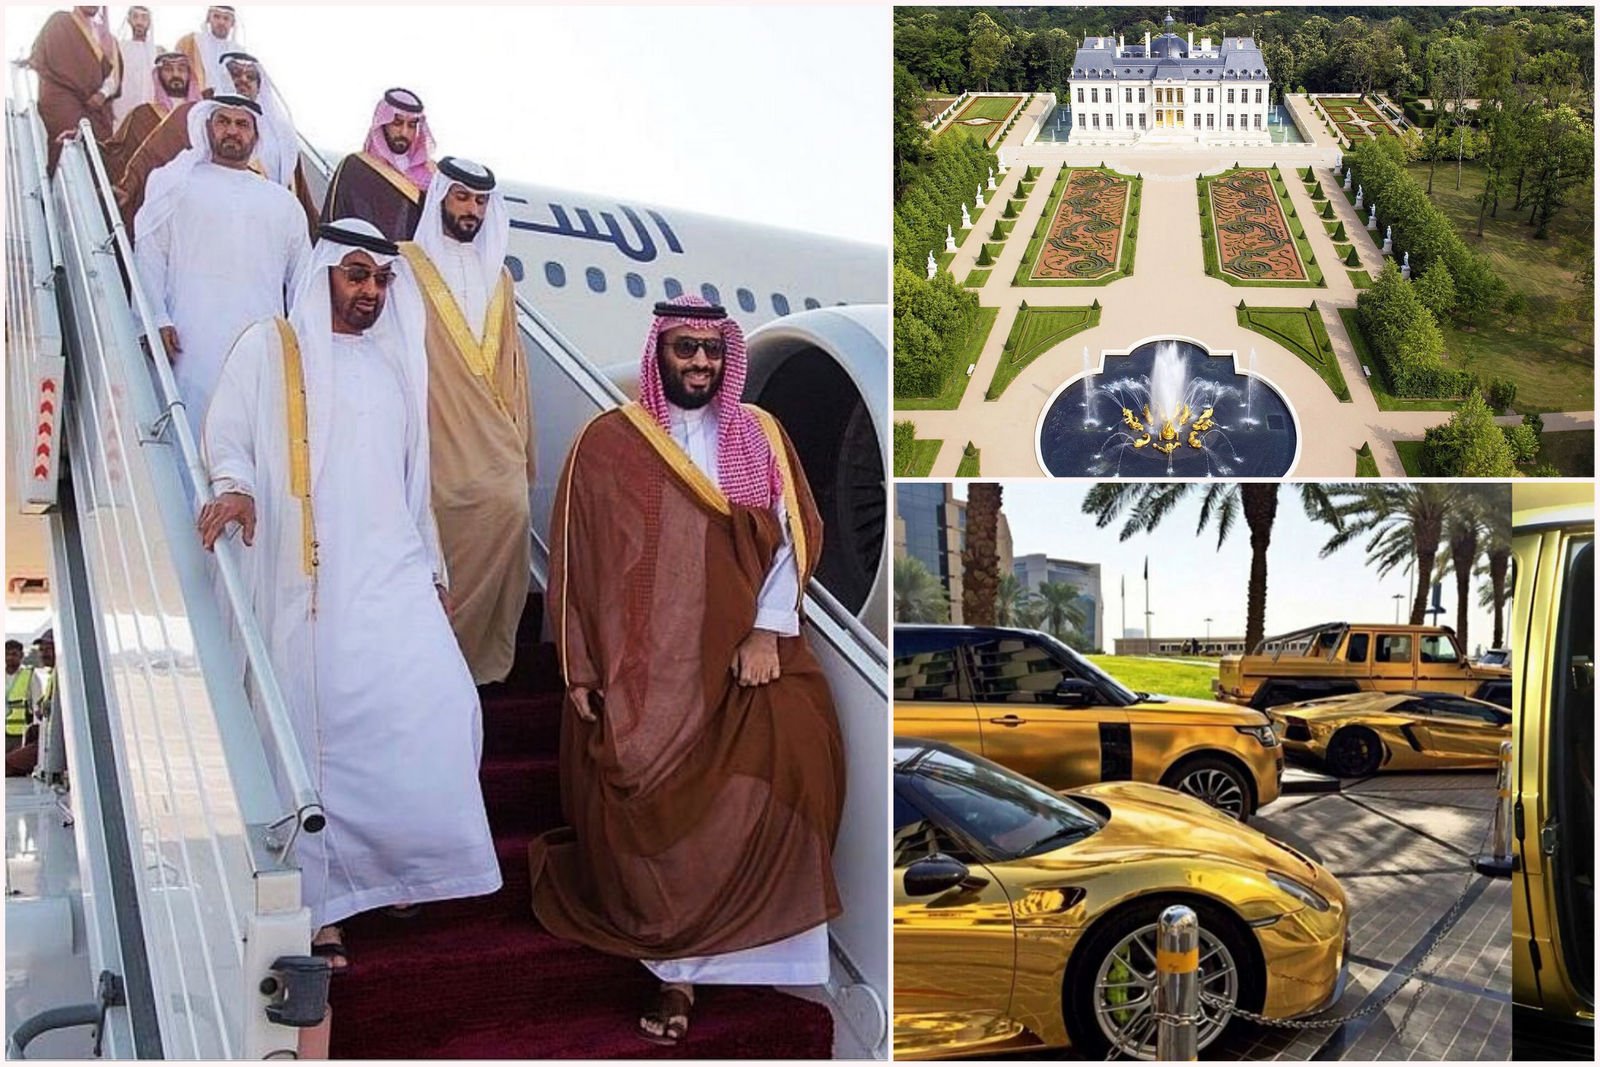 Worth 5 times more than Elon Musk and Bill Gates combined, the Saudi royal family leads a life so luxurious that even billionaires cannot imagine – Their megayacht has a $450M painting, they drive gold plated supercars and their palaces have thousands of rooms.